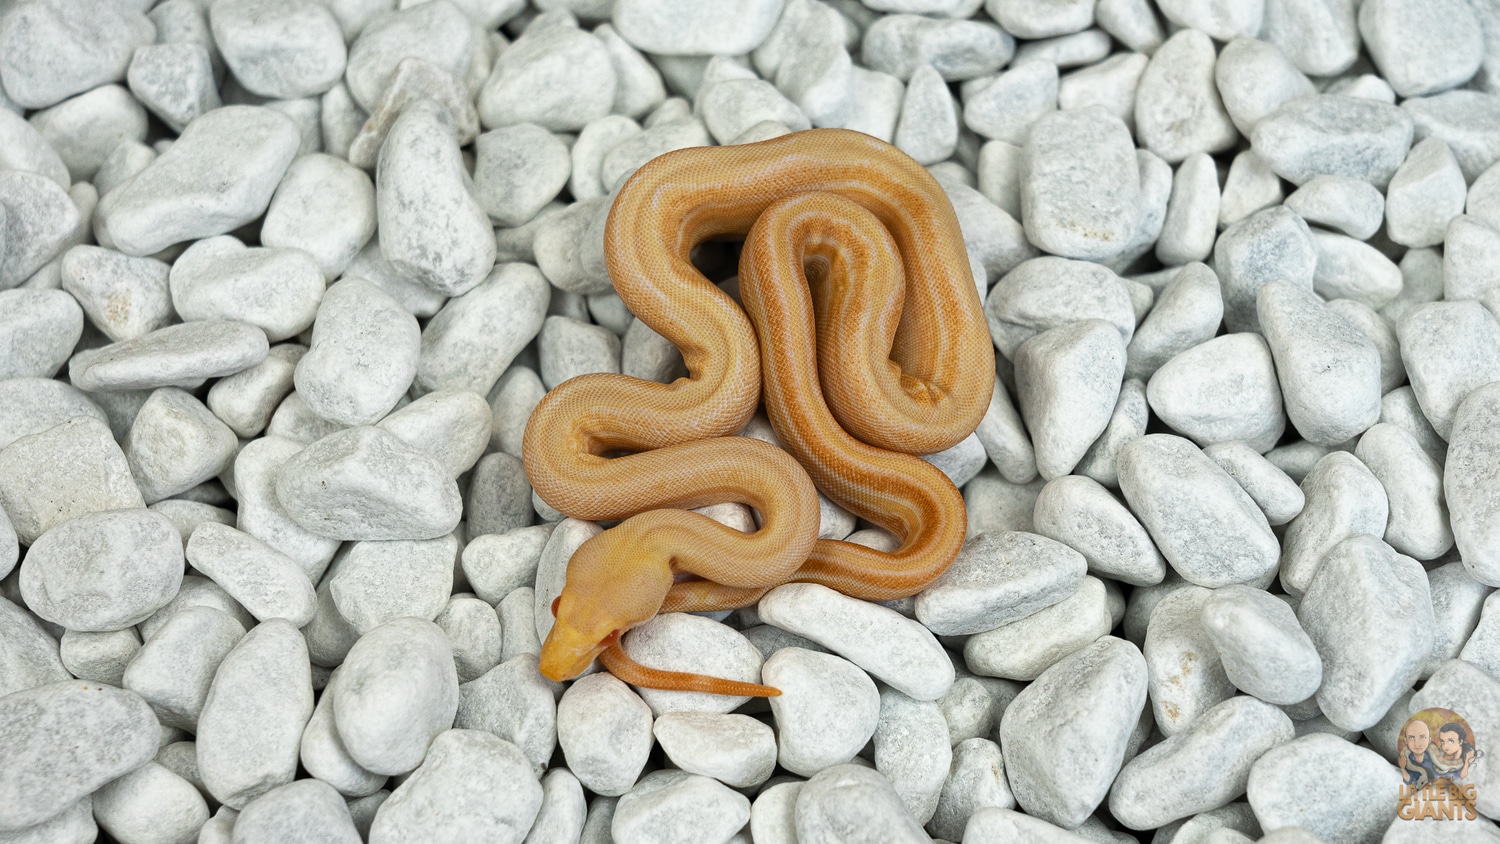 Sharp Albino BlackberryPanther Boa Constrictor by Little-big-giants